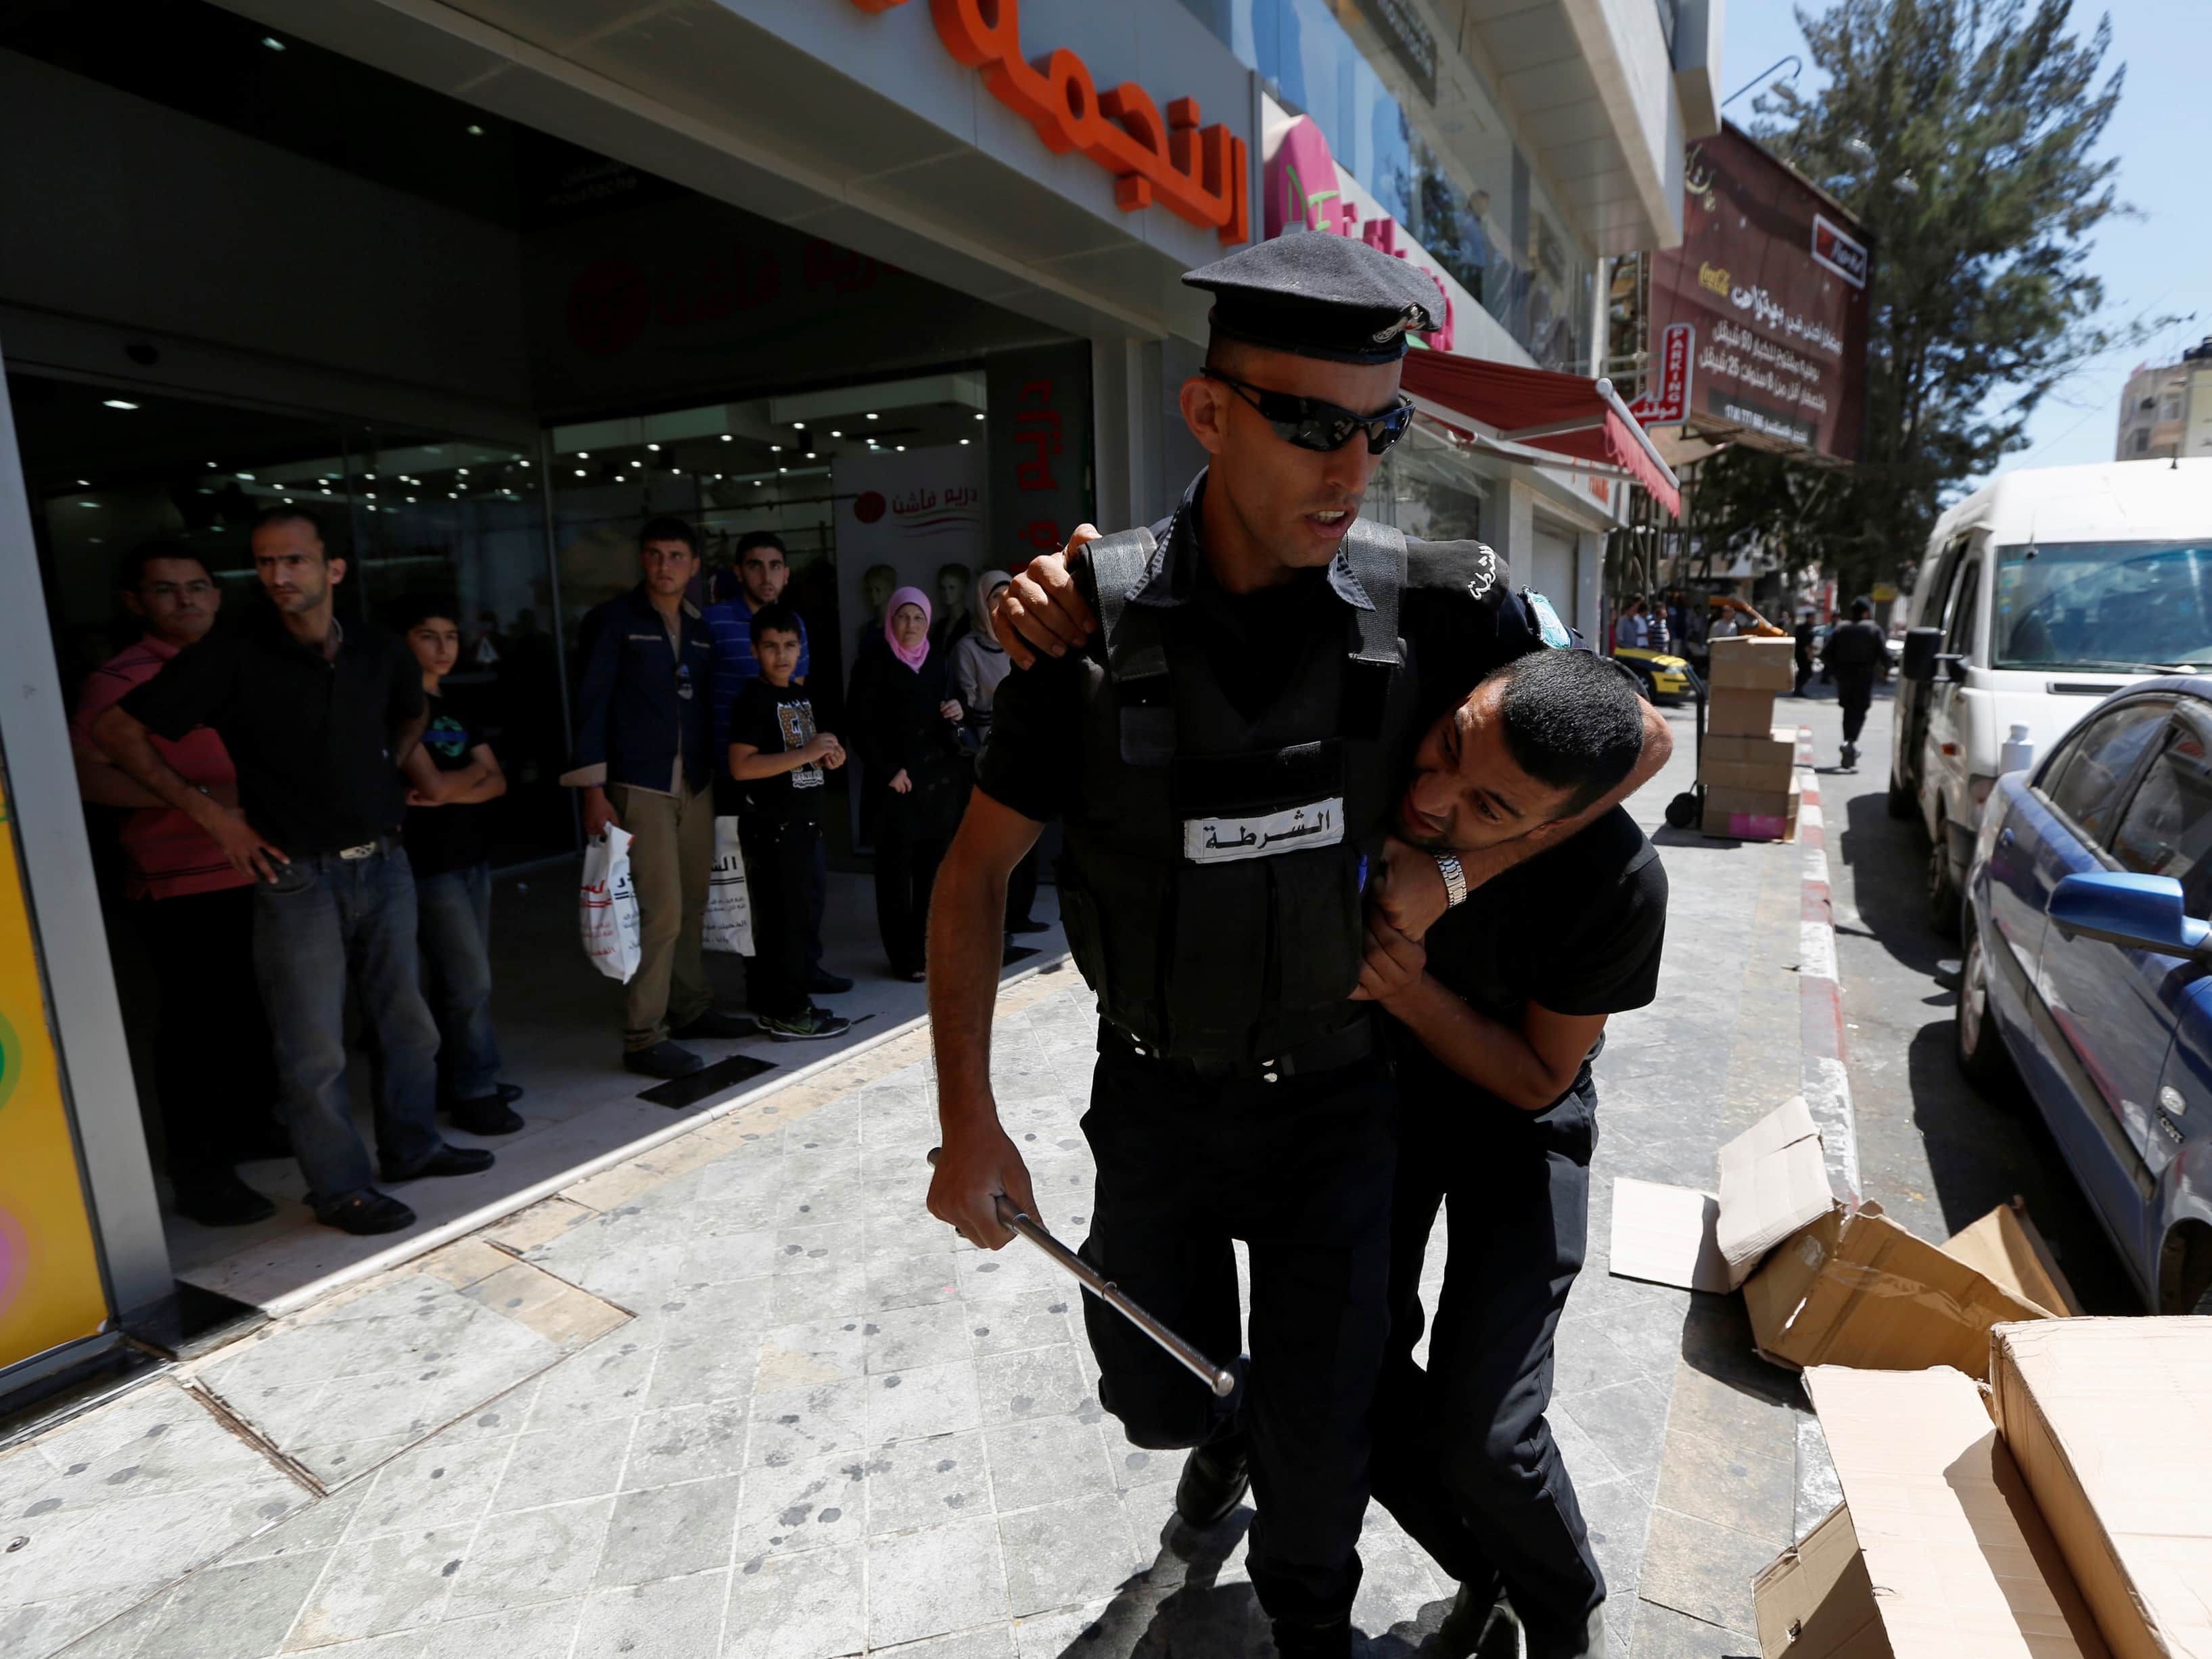 A Palestinian policeman detains a protester during a demonstration against the renewal of stalled peace talks with Israel, in the West Bank city of Ramallah, 28 July 2013, REUTERS/Mohamad Torokman